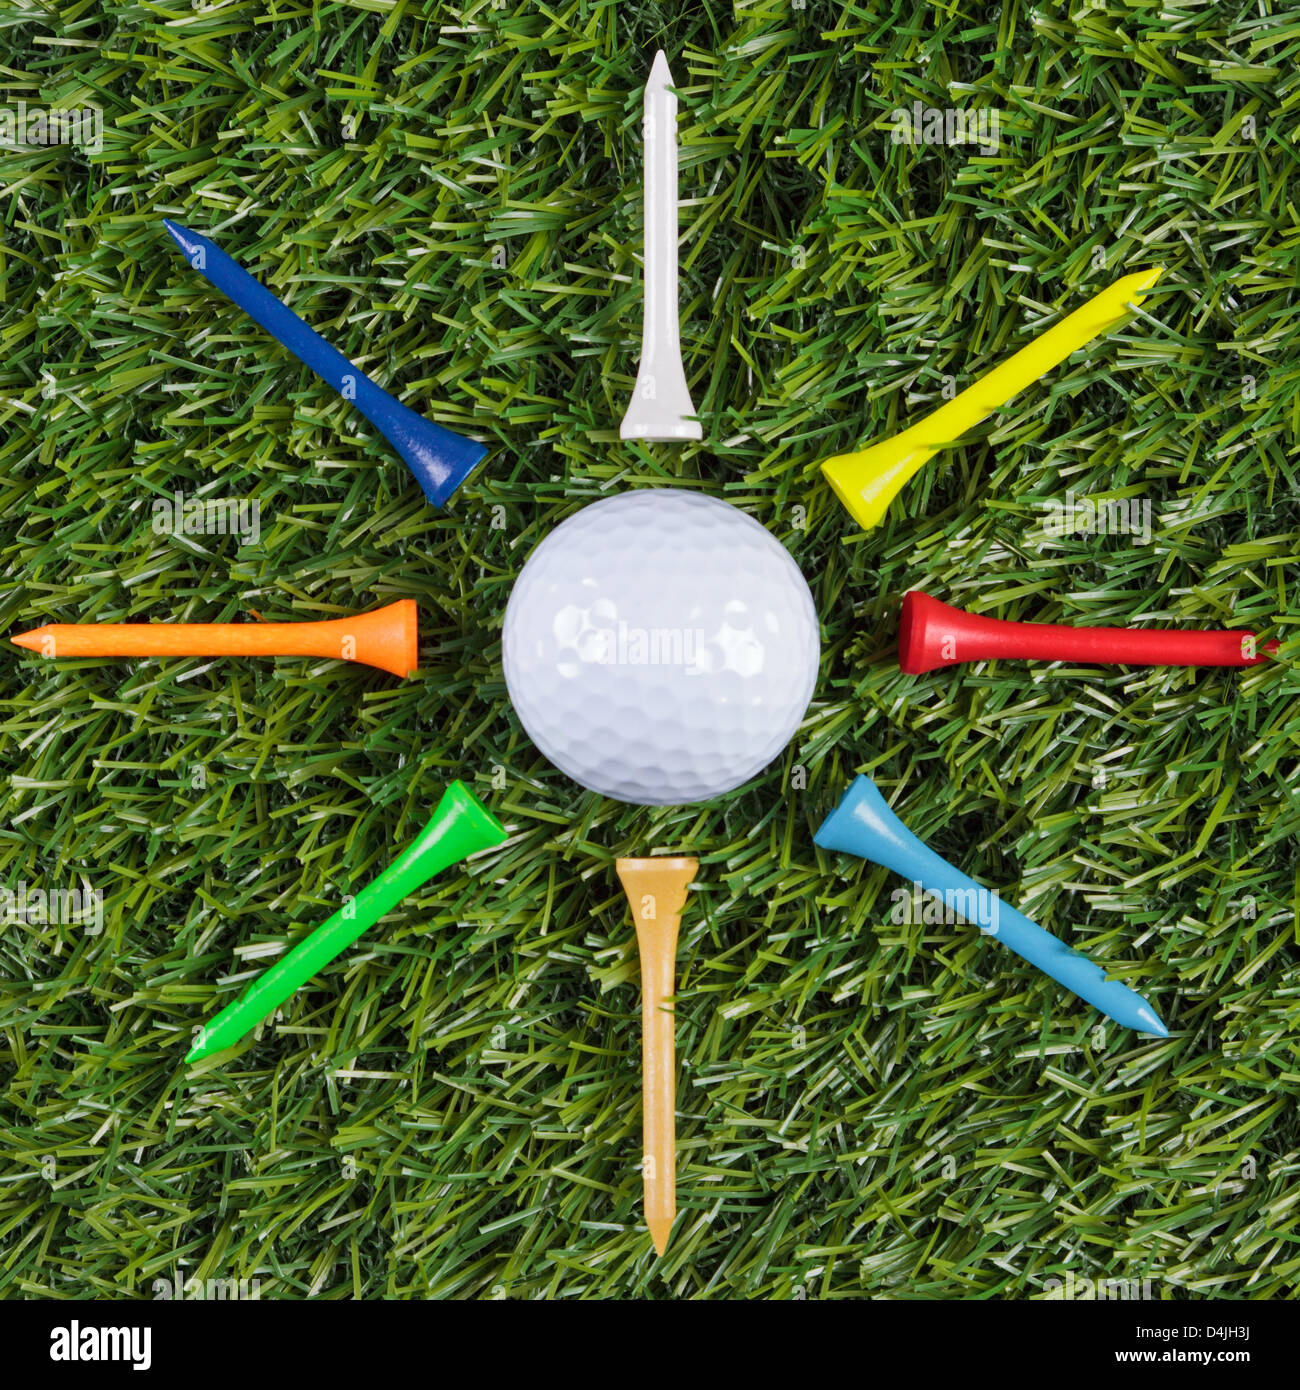 Golf ball with wooden tees arranged around it. Stock Photo